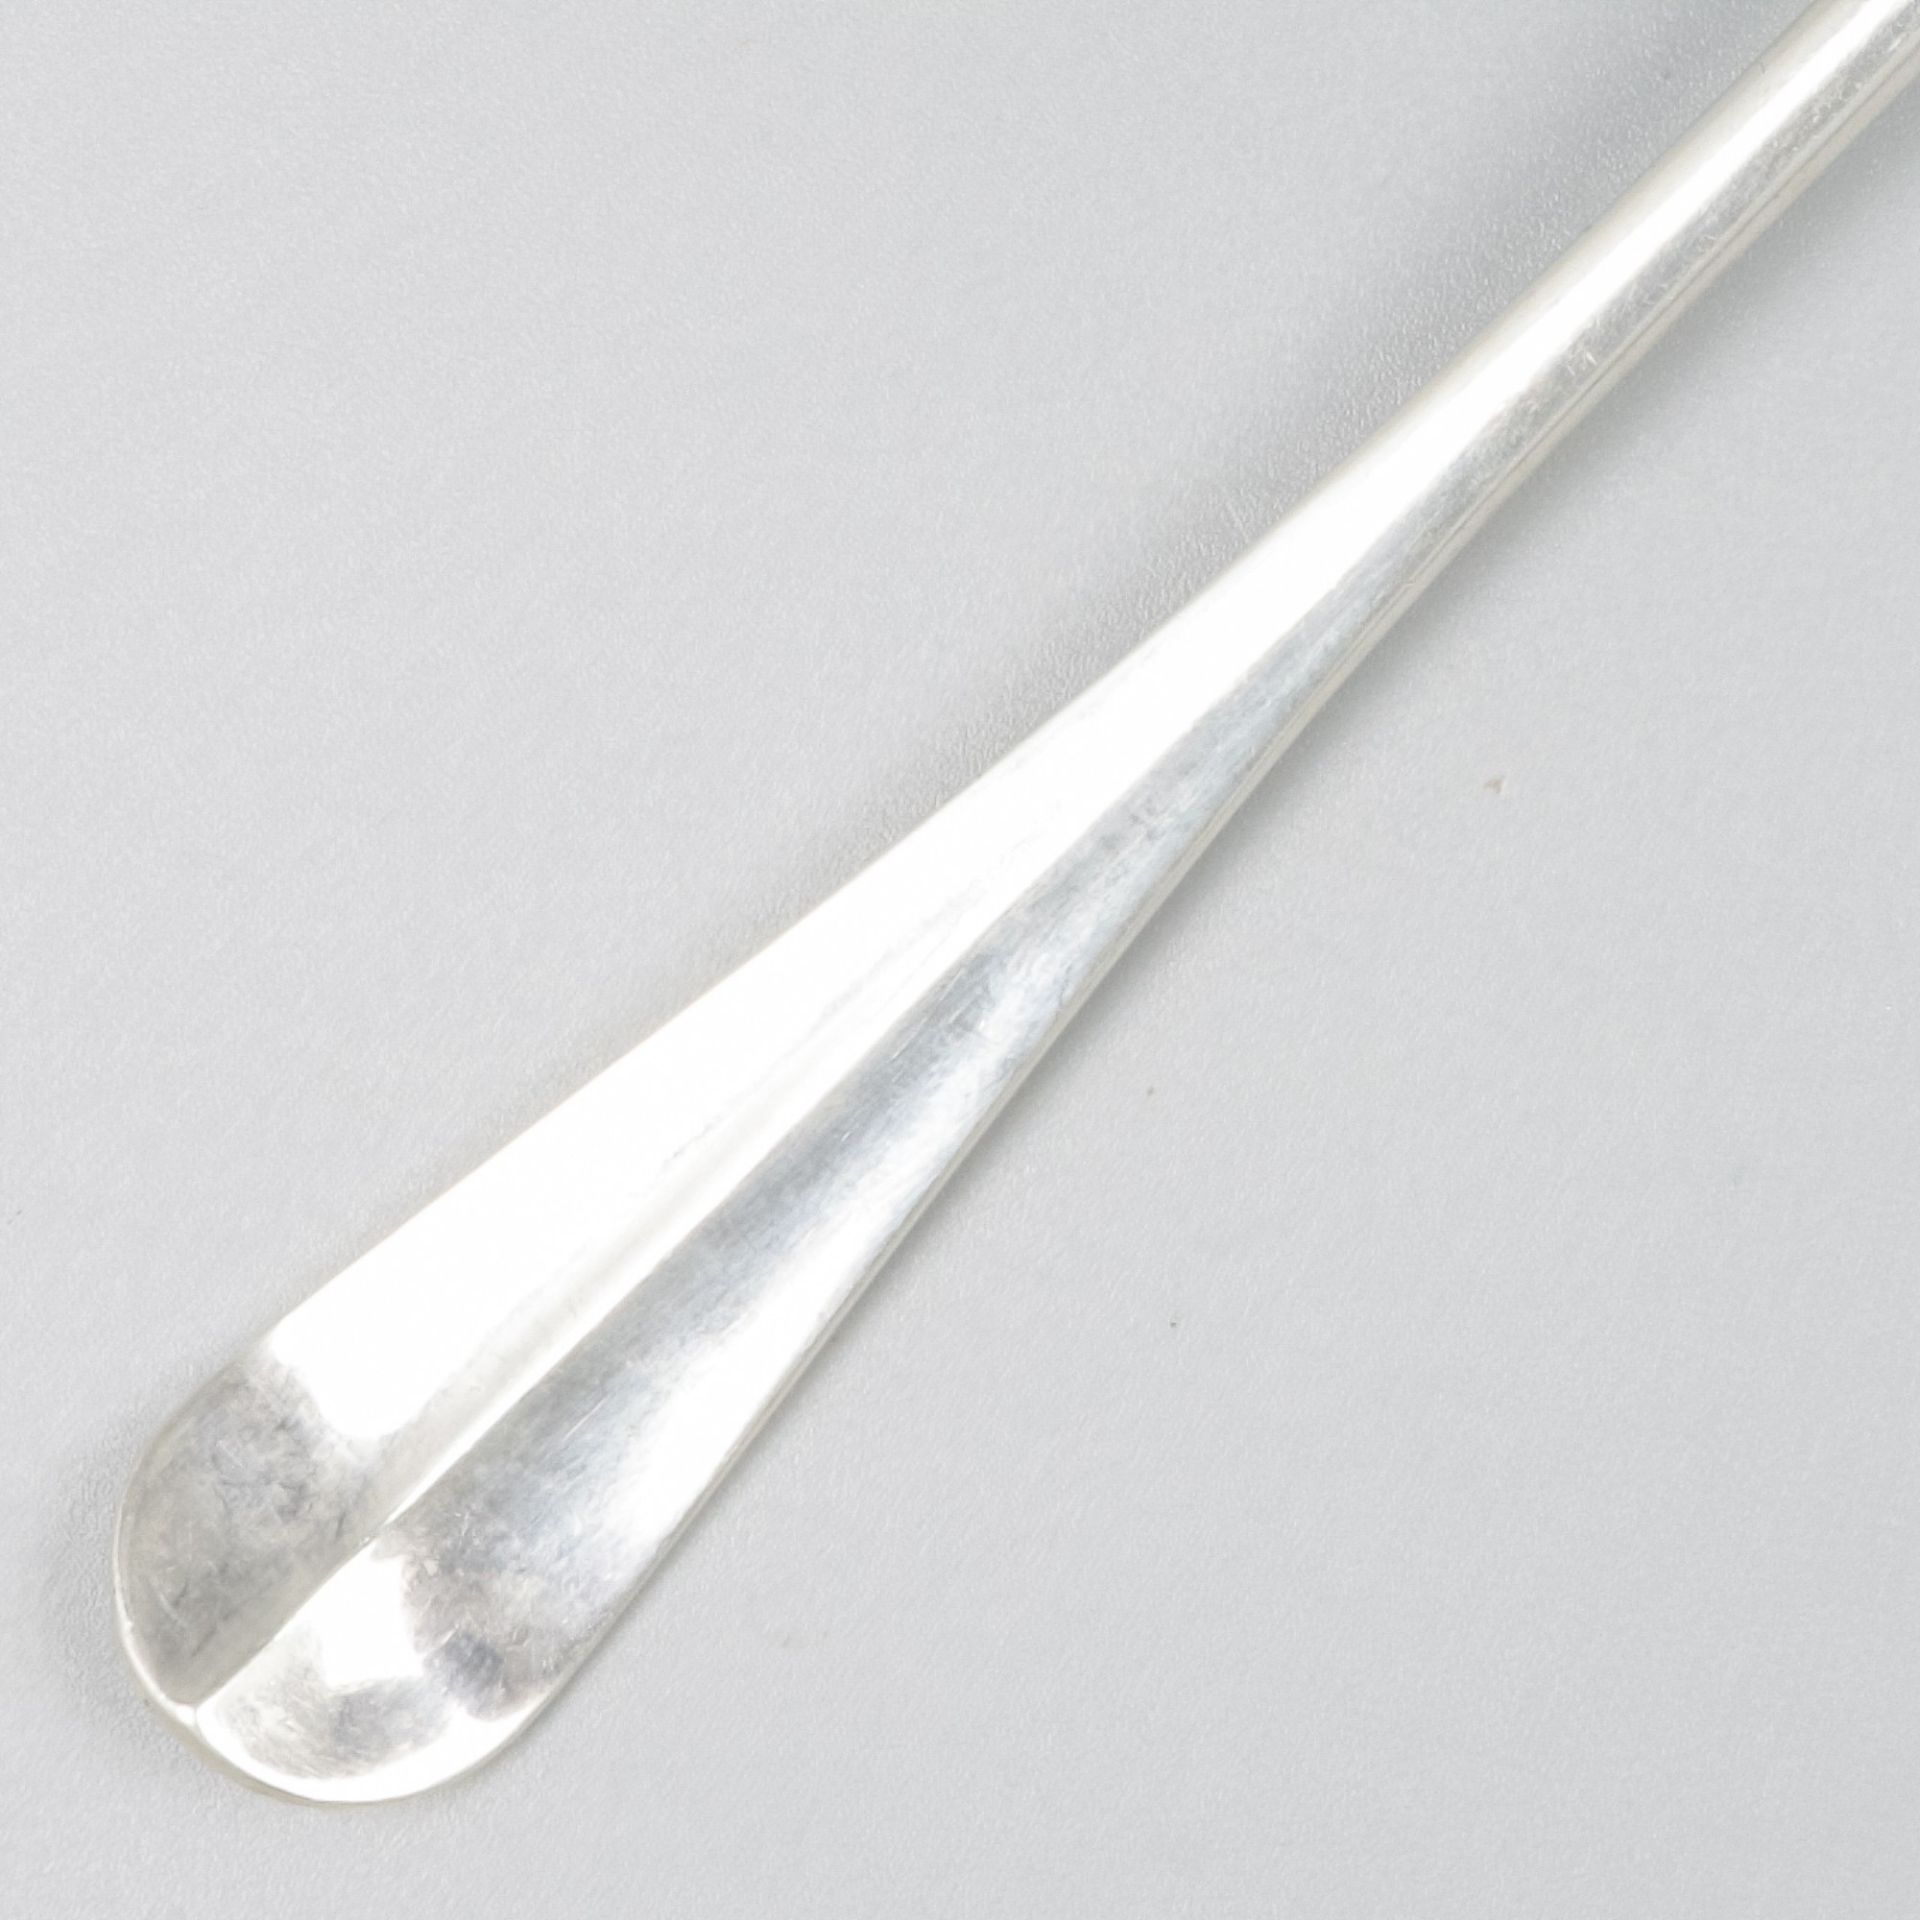 6-piece set of silver spoons. - Image 5 of 6